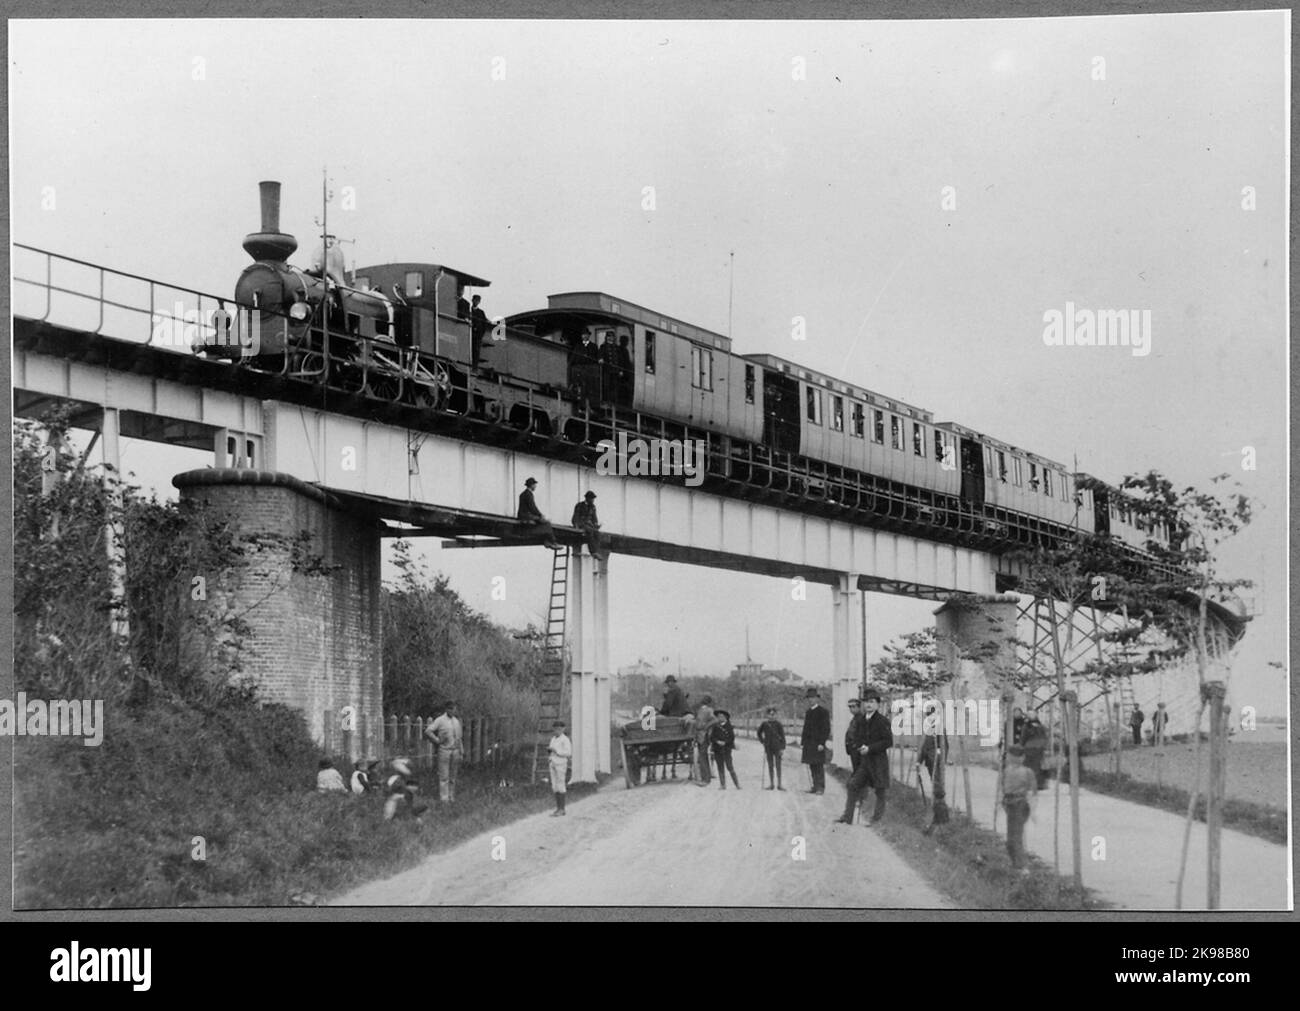 Viaduct at Helsingborg with passenger train. Skåne Halaland's railways, Shj Lok 5 'Engeltofta', made in 1884 by Nohab. In 1896, the locomotive was sold to the State Railways and got Littera SJ VKBD 490. It was scrapped in 1907. Stock Photo